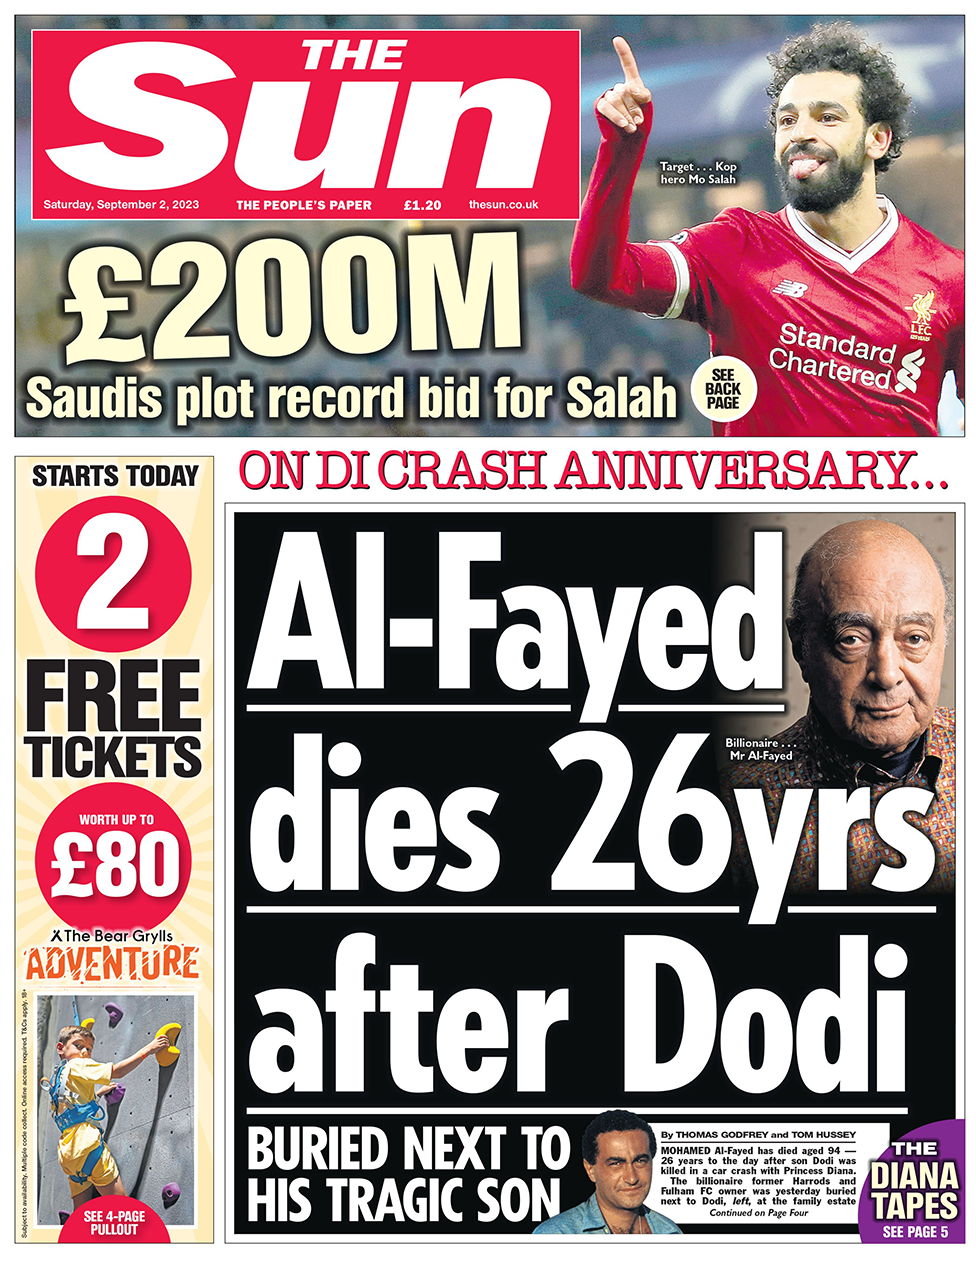 The front page of the Sun newspaper